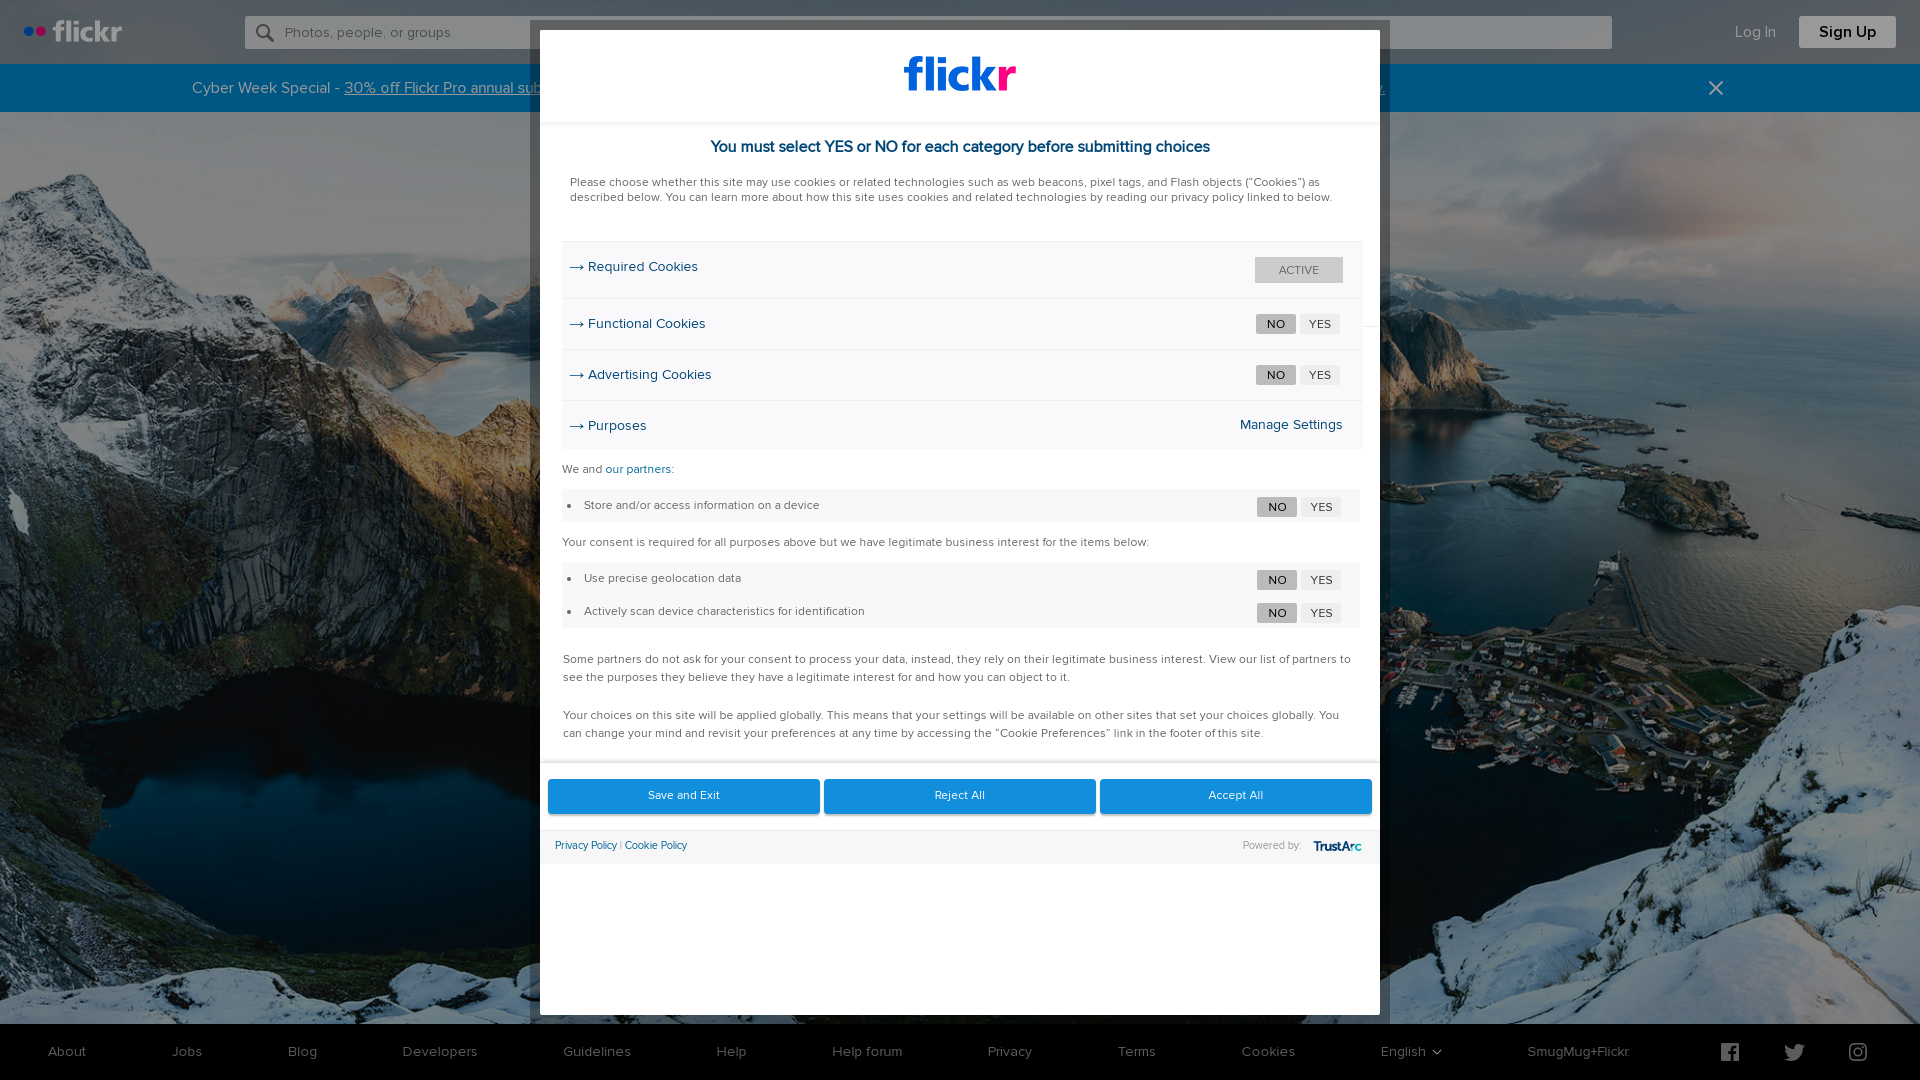 Flickr is an American image hosting and video hosting service, as well as an online community, founded in Canada and headquartered in the United States. 